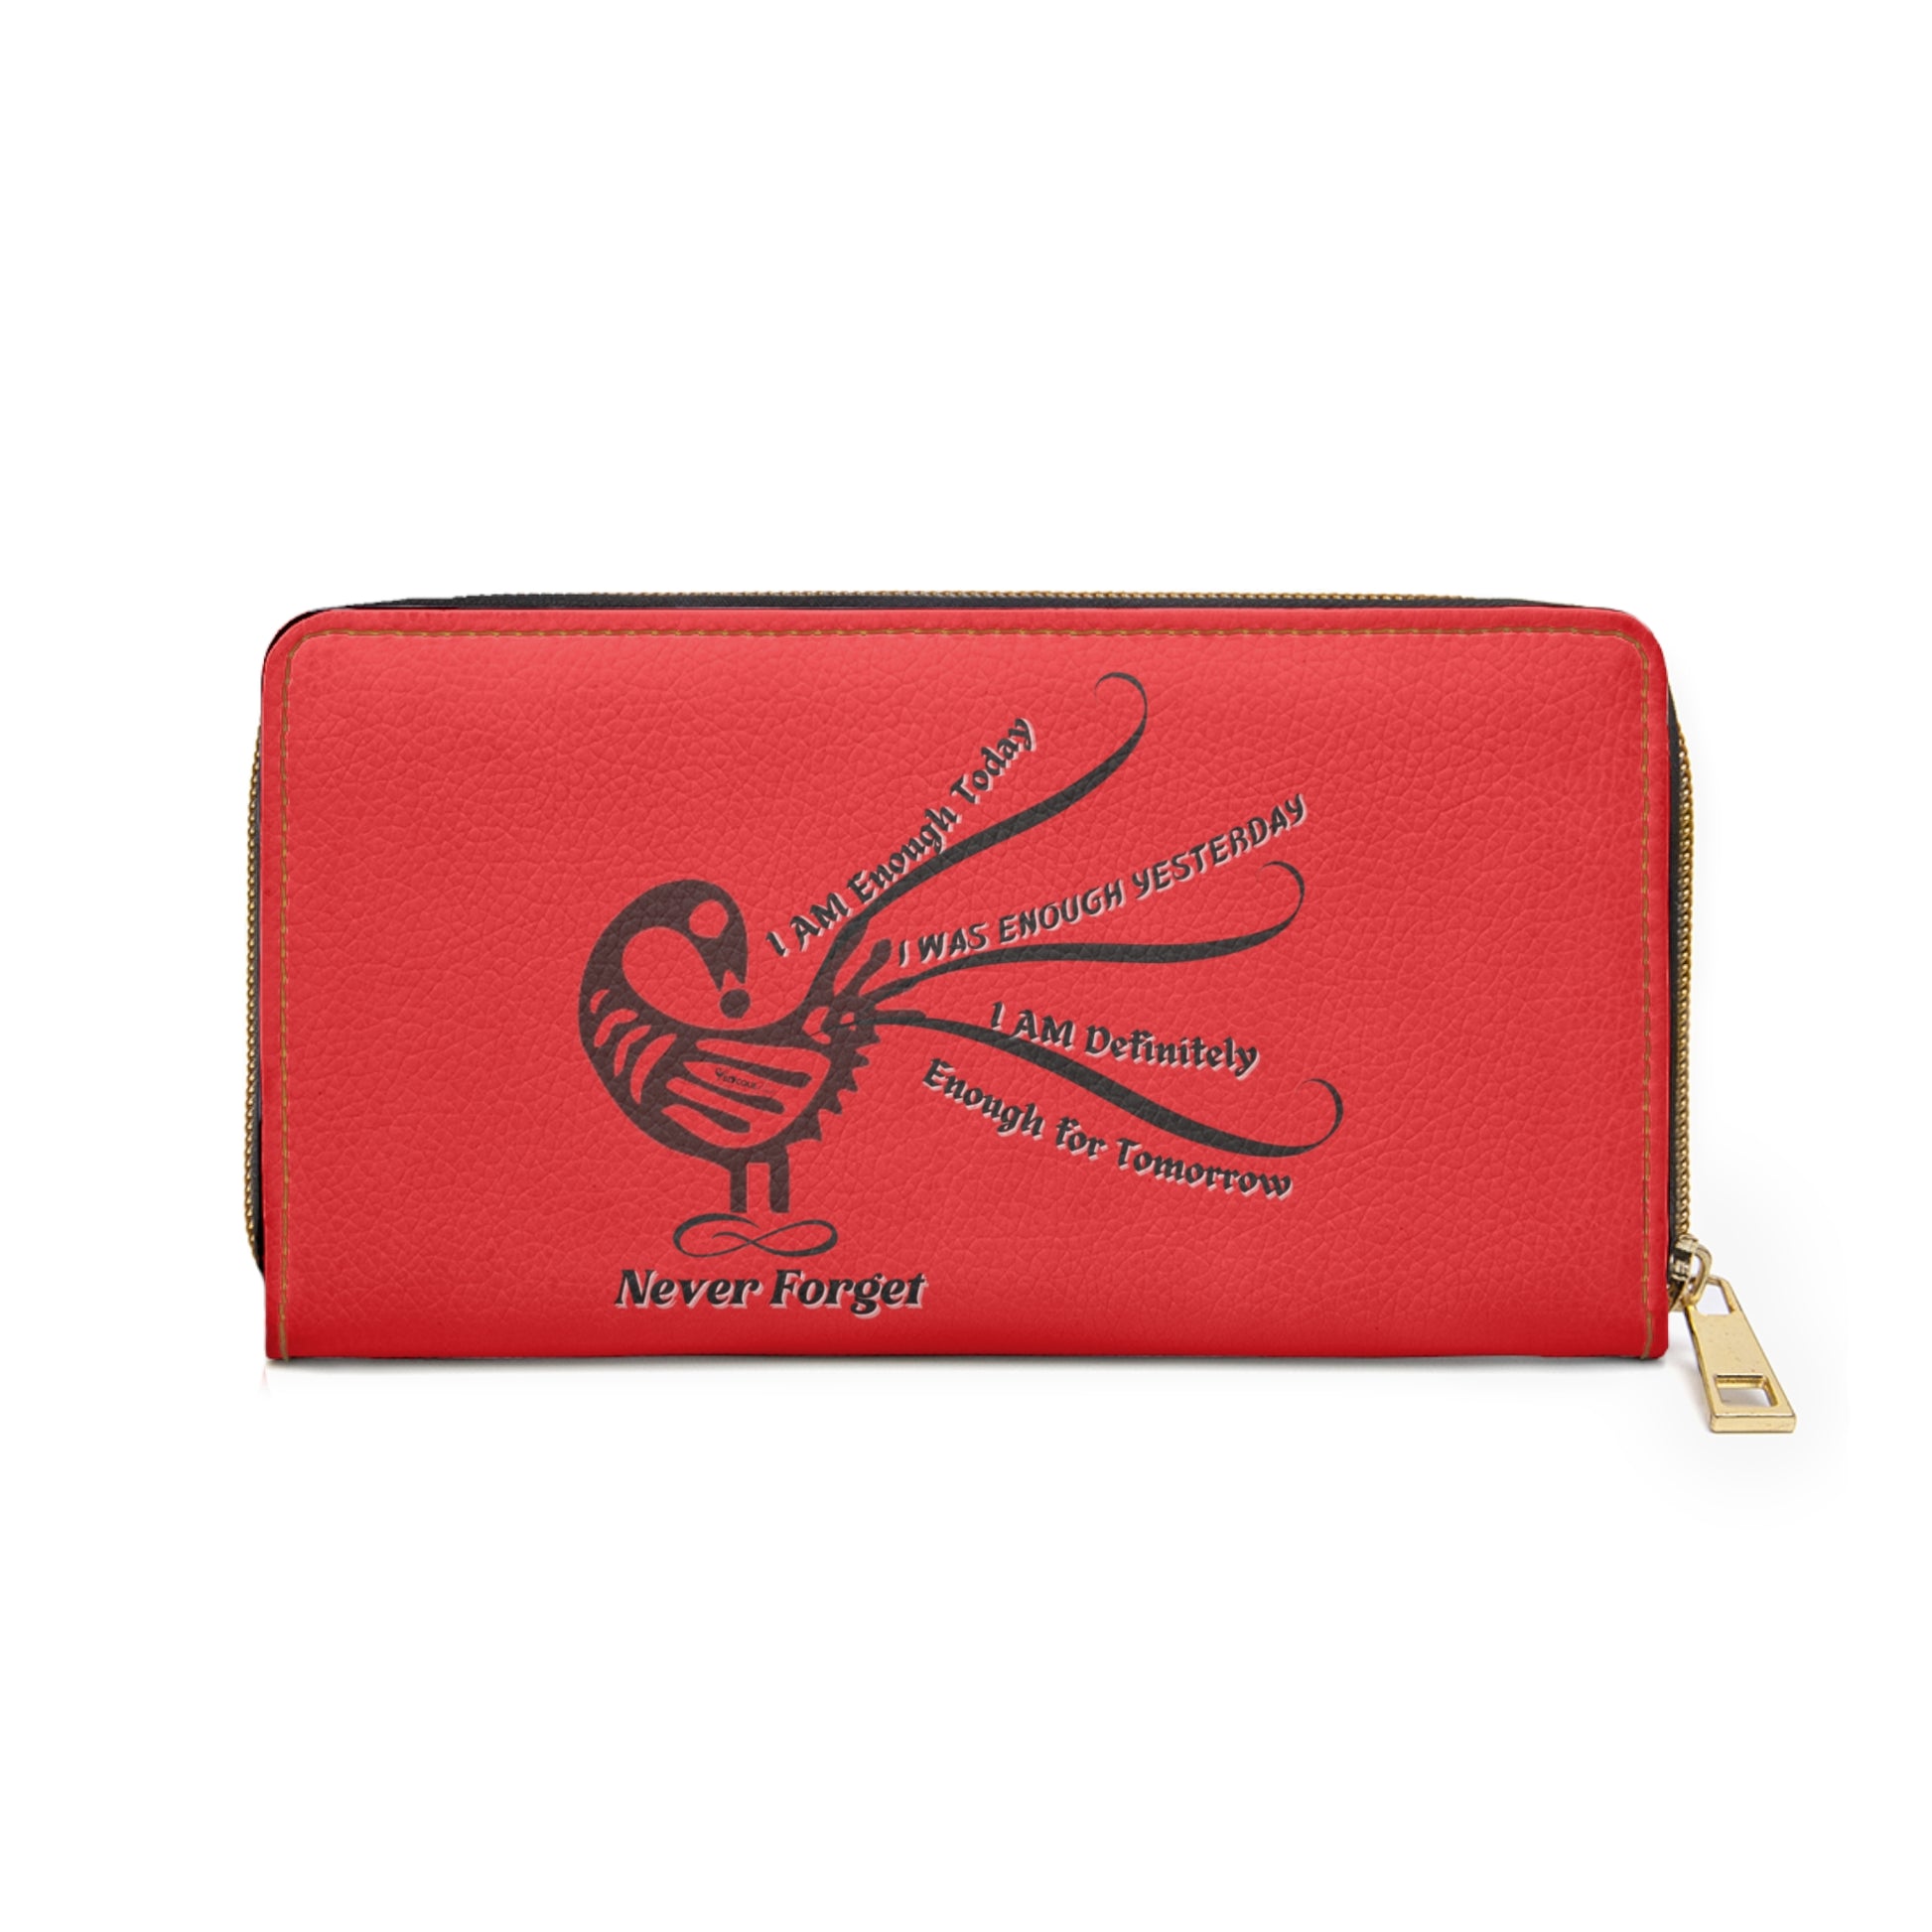 I AM More Than Enough- Positive Afrocentric Affirmation Vegan Leather Wallet Bag- Empower Your Style and Self-Love ; Red Wallet